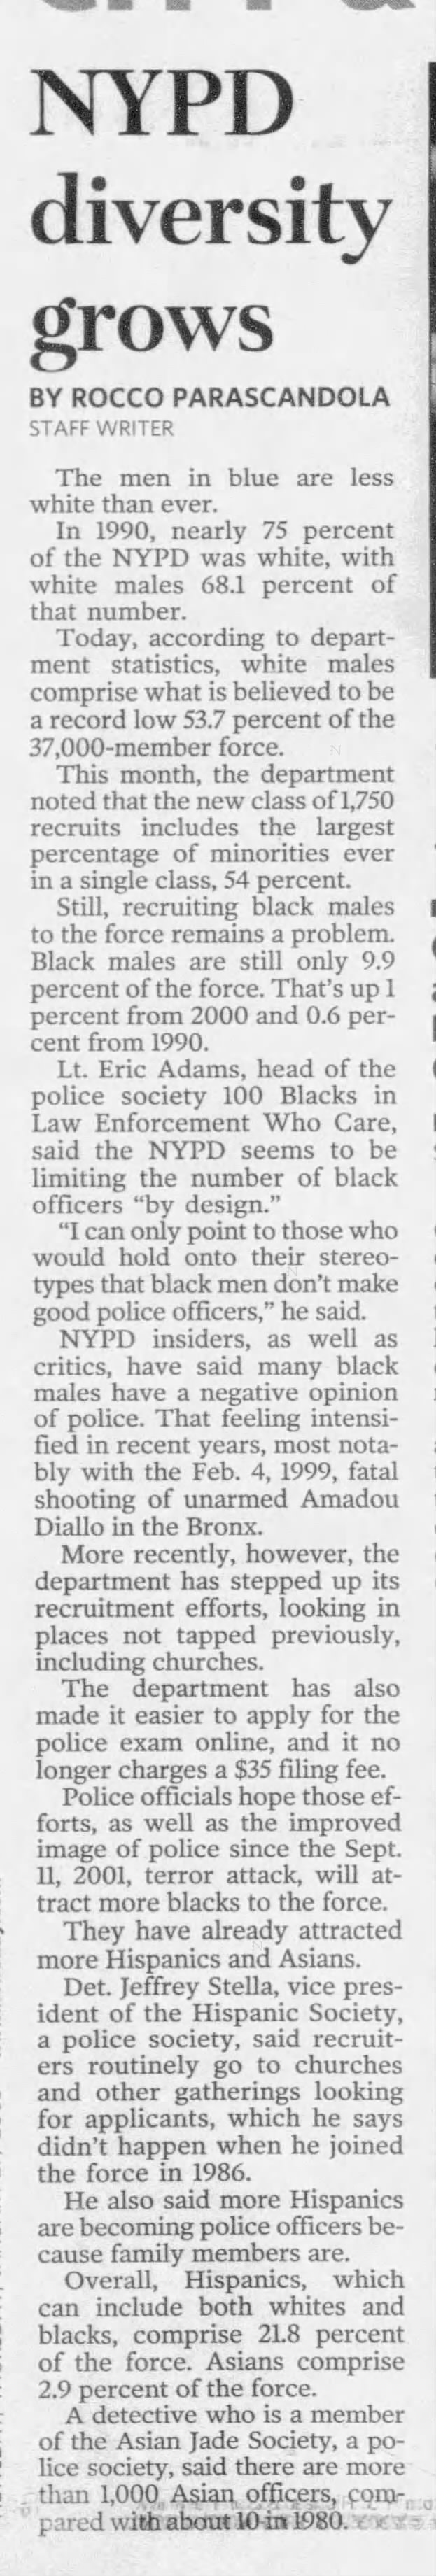 Lt. Eric Adams pushes for NYPD diversity, 2005